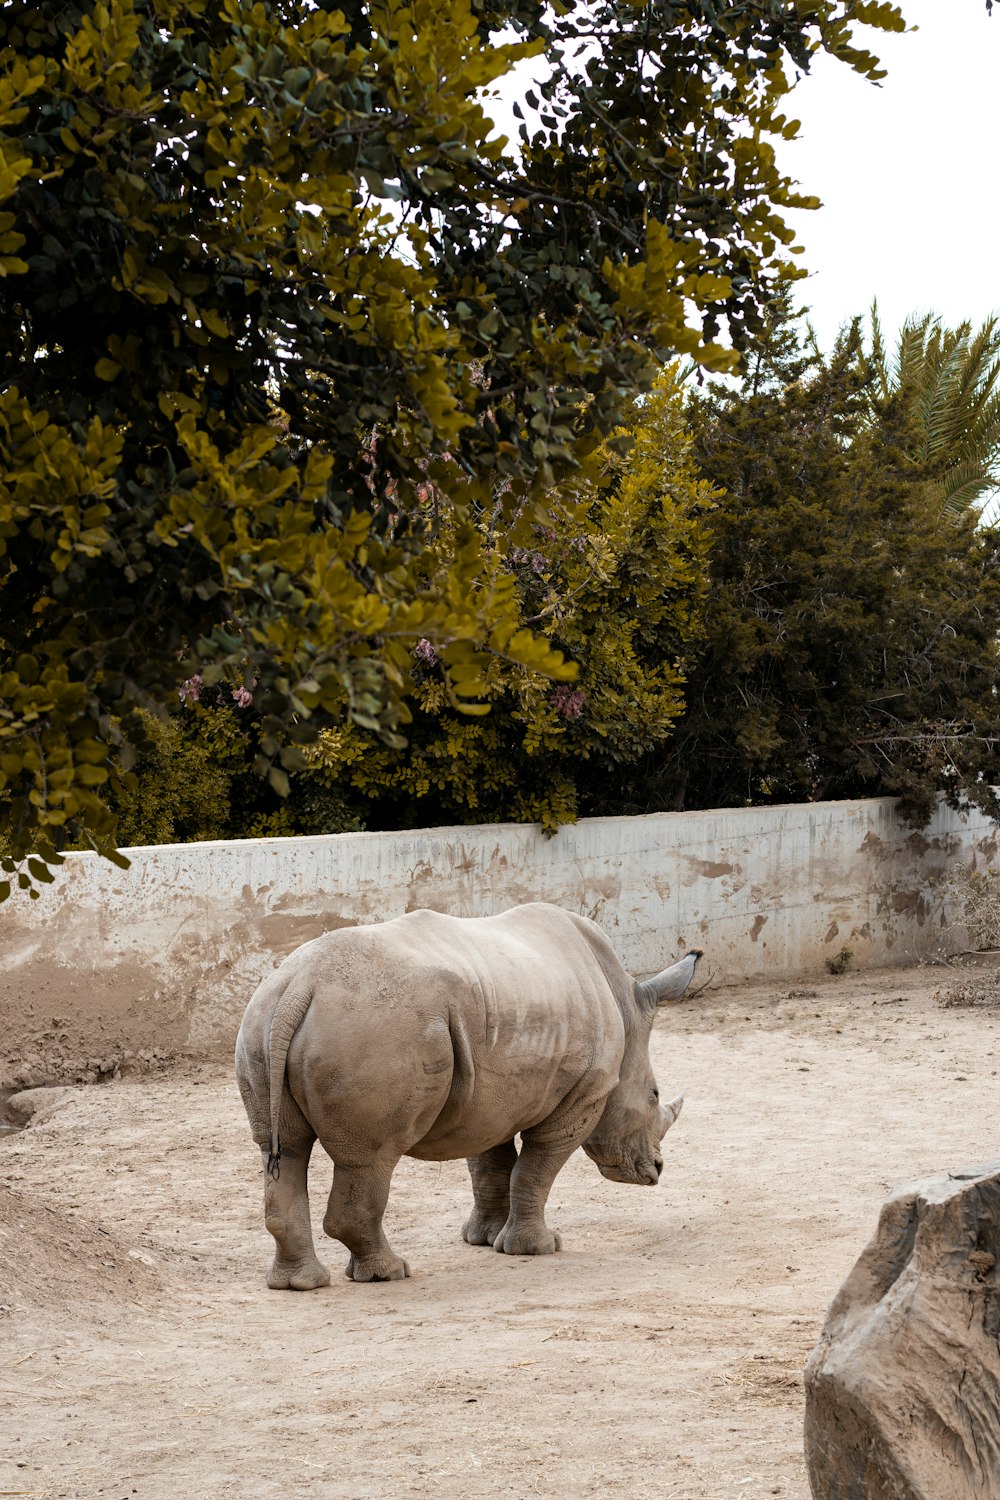 a rhino standing in a dirt field next to a tree